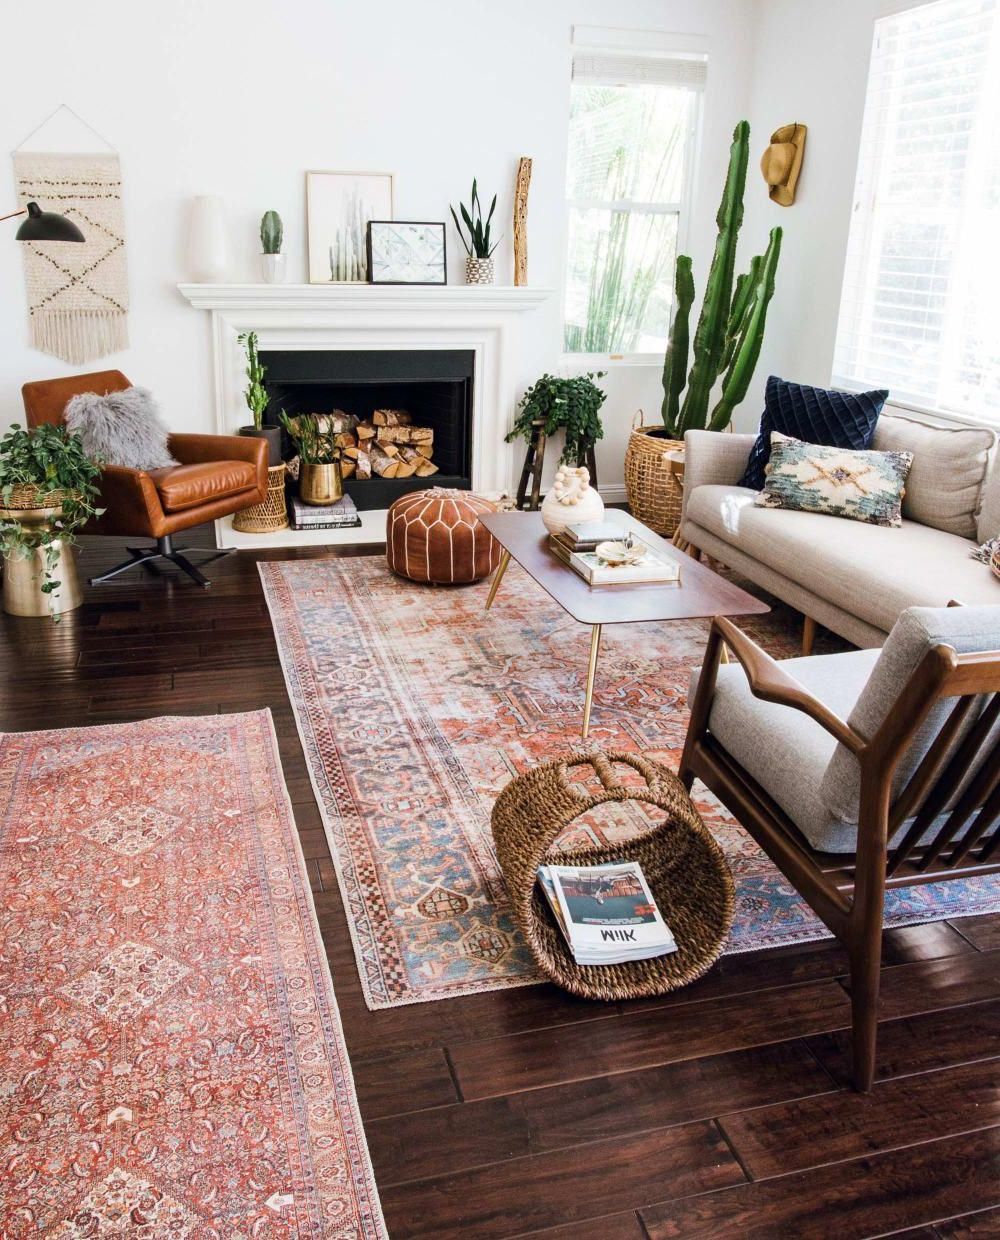 Layered And Cozy Eclectic Living Space. Boho, Vintage And Mid Century Within Cozy Castle Boho Living Room Tables (Gallery 14 of 20)